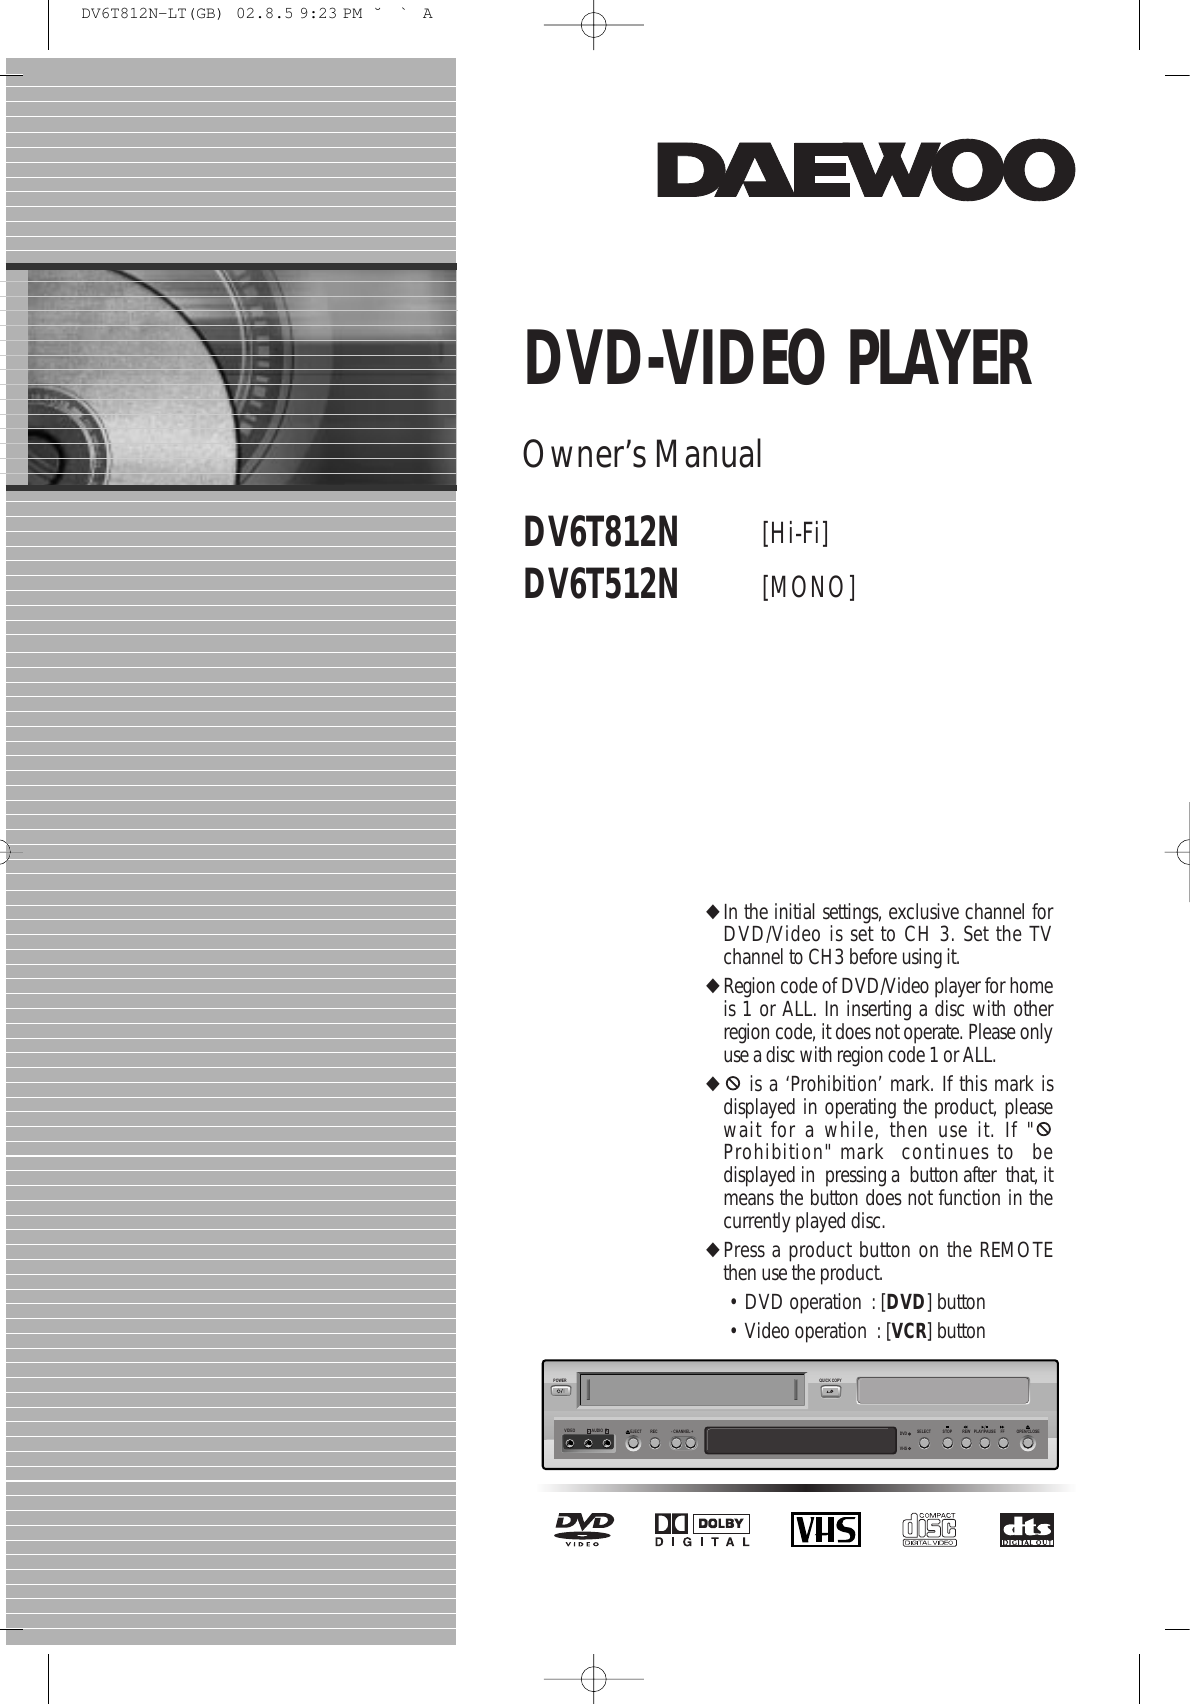 STOPSELECTQUICK COPYPOWER- CHANNEL +EJECTVIDEO AUDIO RL REC DVDVHSREW PLAY/PAUSE FF OPEN/CLOSEDV6T812NDV6T512N [Hi-Fi] [MONO]DVD-VIDEO PLAYEROwner’s Manual◆In the initial settings, exclusive channel forDVD/Video is set to CH 3. Set the TVchannel to CH3 before using it. ◆Region code of DVD/Video player for homeis 1 or ALL. In inserting a disc with otherregion code, it does not operate. Please onlyuse a disc with region code 1 or ALL. ◆is a ‘Prohibition’ mark. If this mark isdisplayed in operating the product, pleasewait for a while, then use it. If &quot;Prohibition&quot; mark  continues to  bedisplayed in  pressing a  button after  that, itmeans the button does not function in thecurrently played disc.◆Press a product button on the REMOTEthen use the product. • DVD operation  : [DVD] button • Video operation  : [VCR] button DV6T812N-LT(GB)  02.8.5 9:23 PM  ˘`A